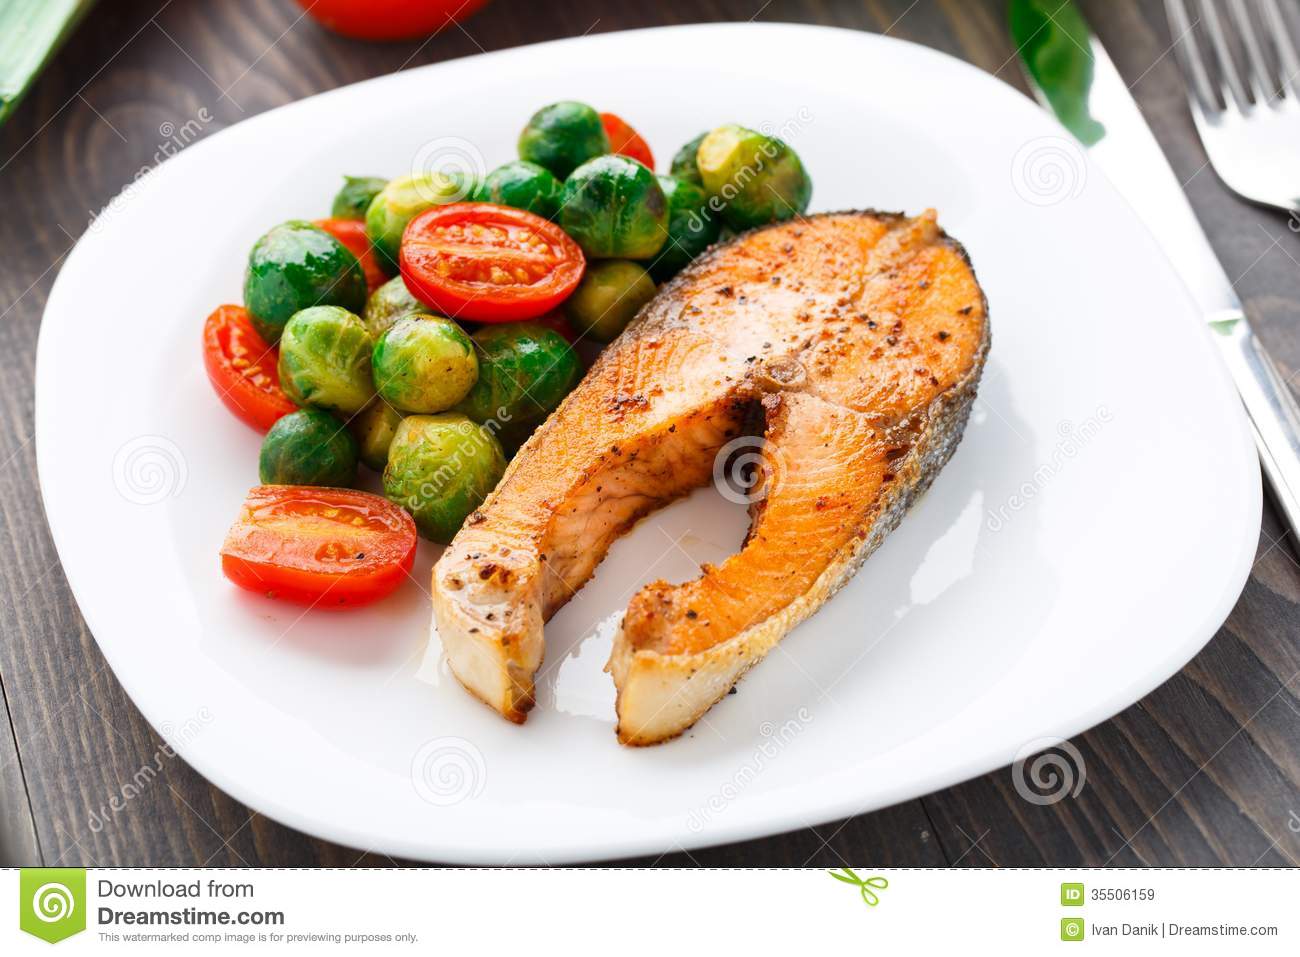 Royalty Free Stock Images  Salmon With Roasted Brussels Sprout And